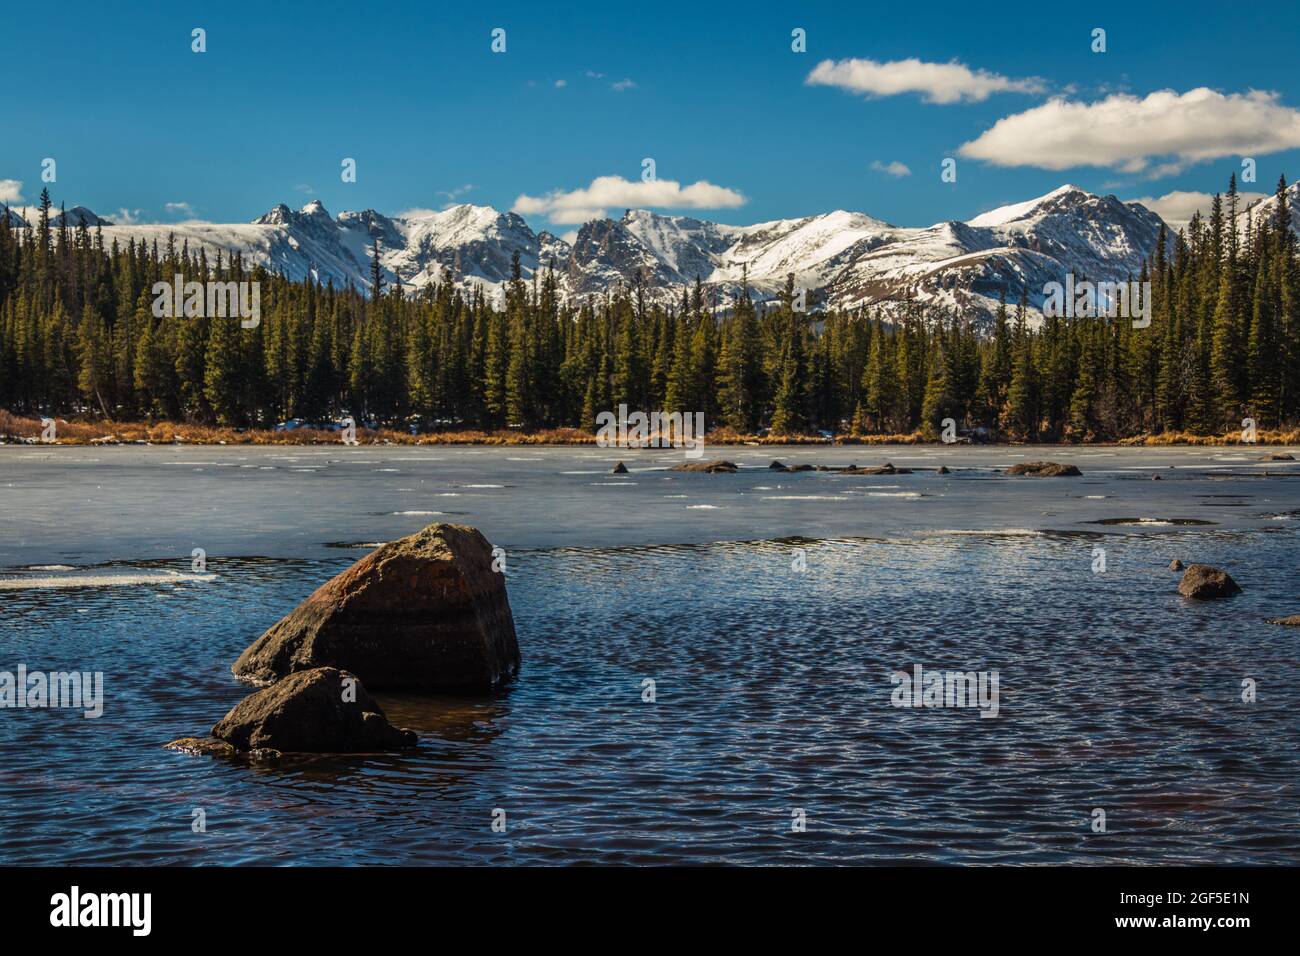 A wide angle landscape shot of a snowy Colorado mountain range and pine trees with a lake of water in the foreground with rocks, daytime in winter Stock Photo